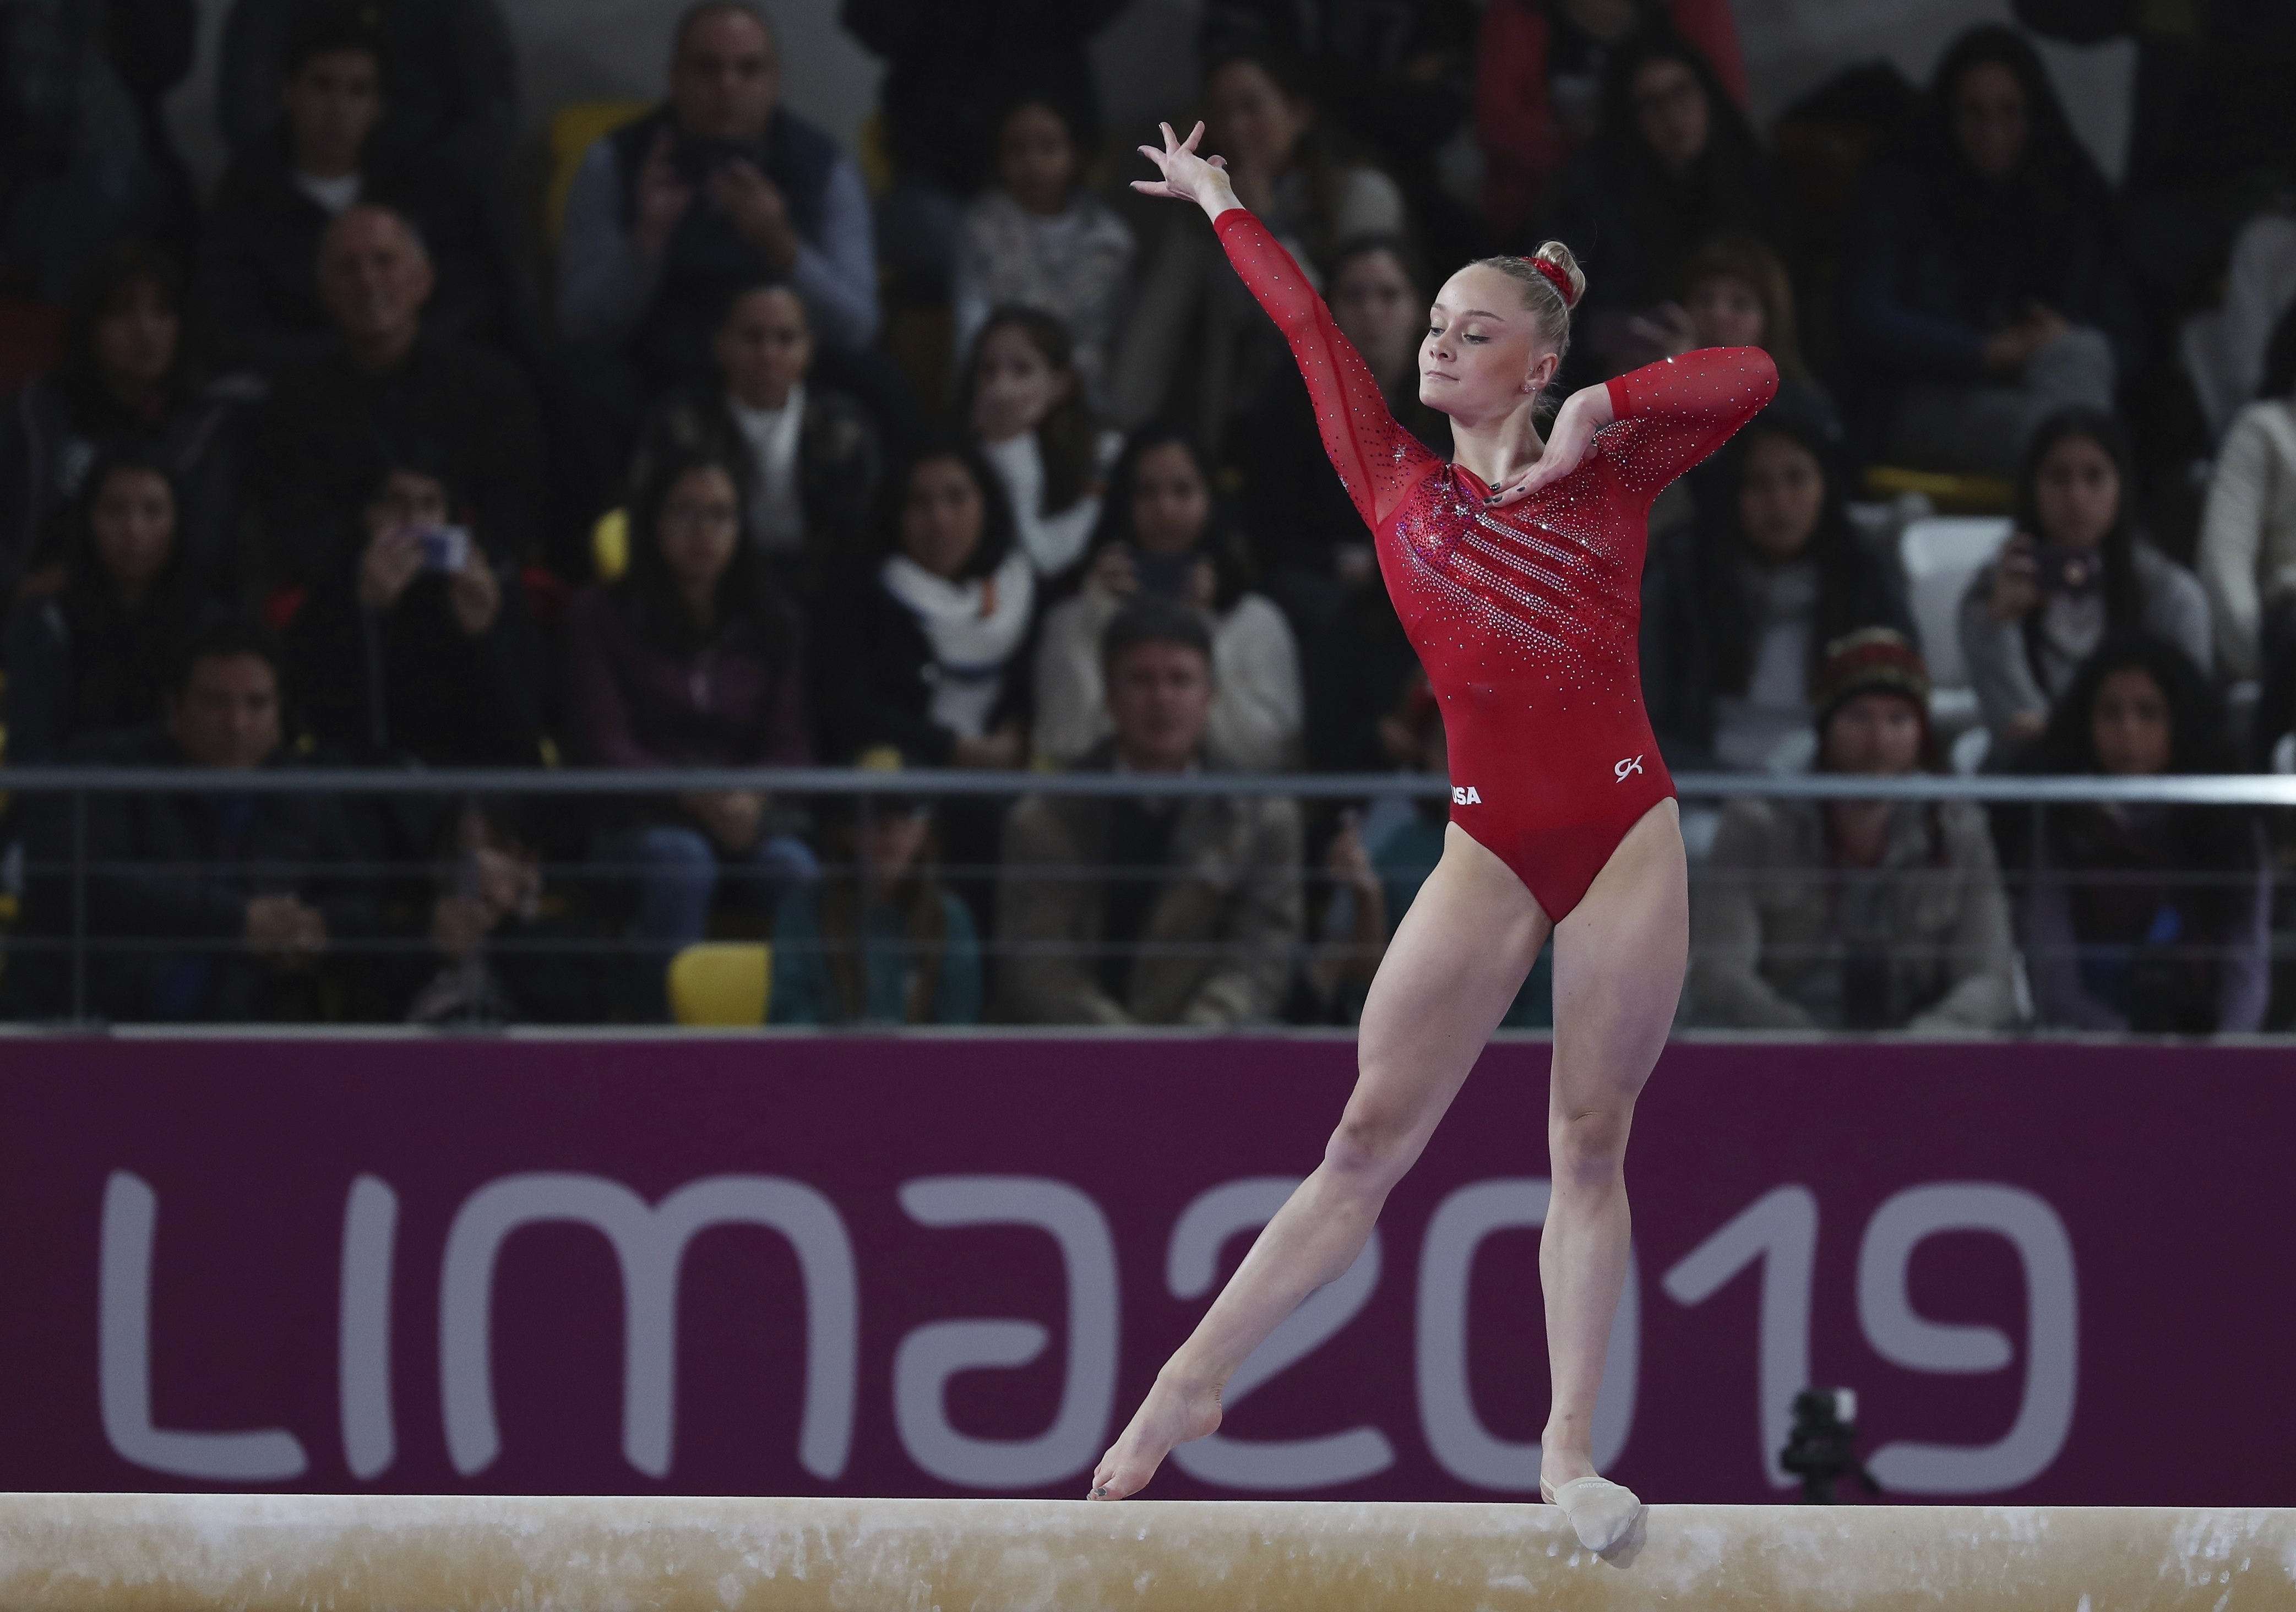 N.Js Maggie Haney sues USA Gymnastics over suspension stemming from abuse allegations